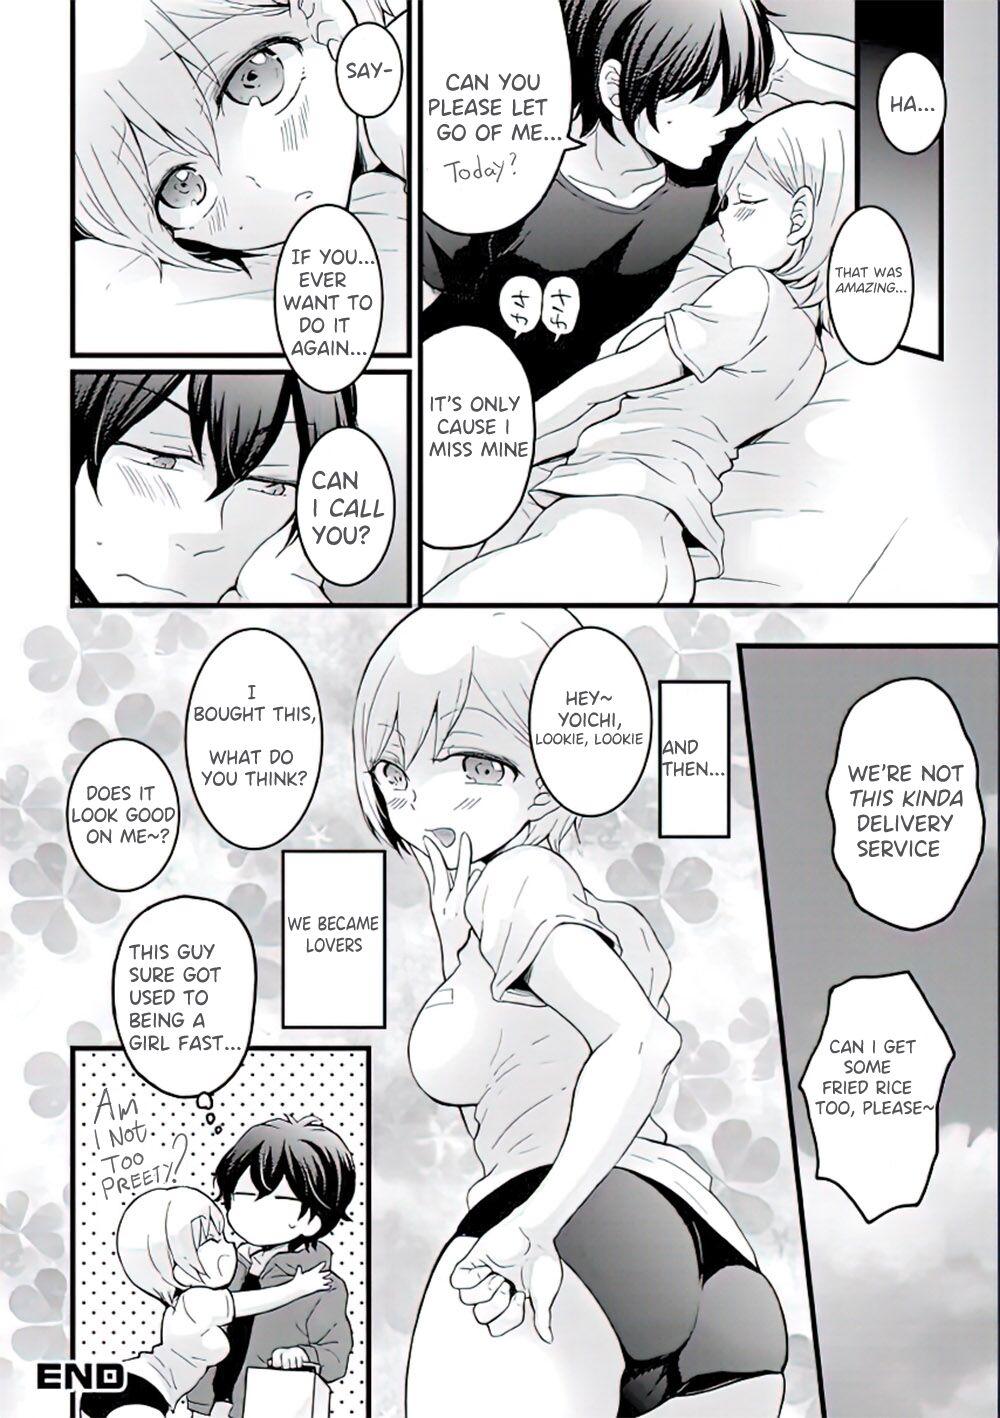 Pussylicking Demae wa Itsumo no | Delivery As Usual - Original Action - Page 16